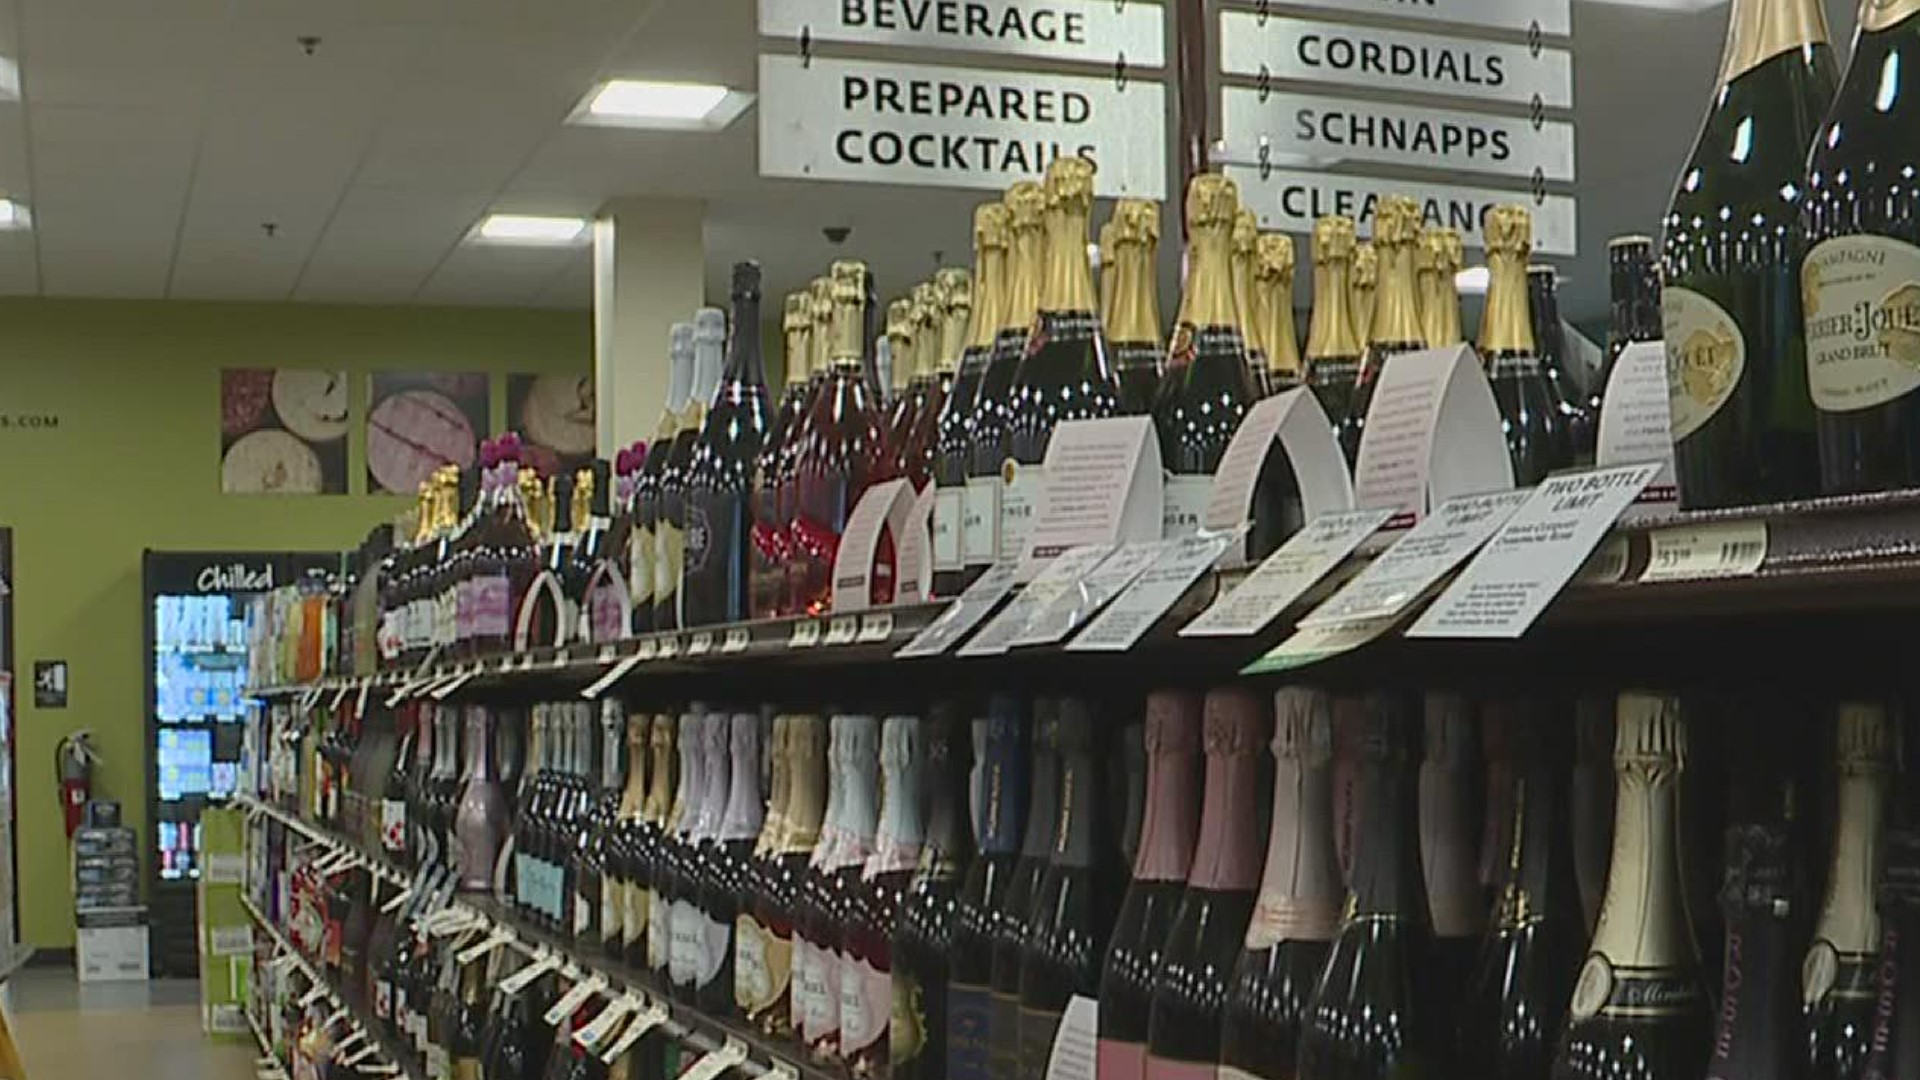 The PLCB is set to increase prices by 4% on the state's most popular drinks on Sunday.